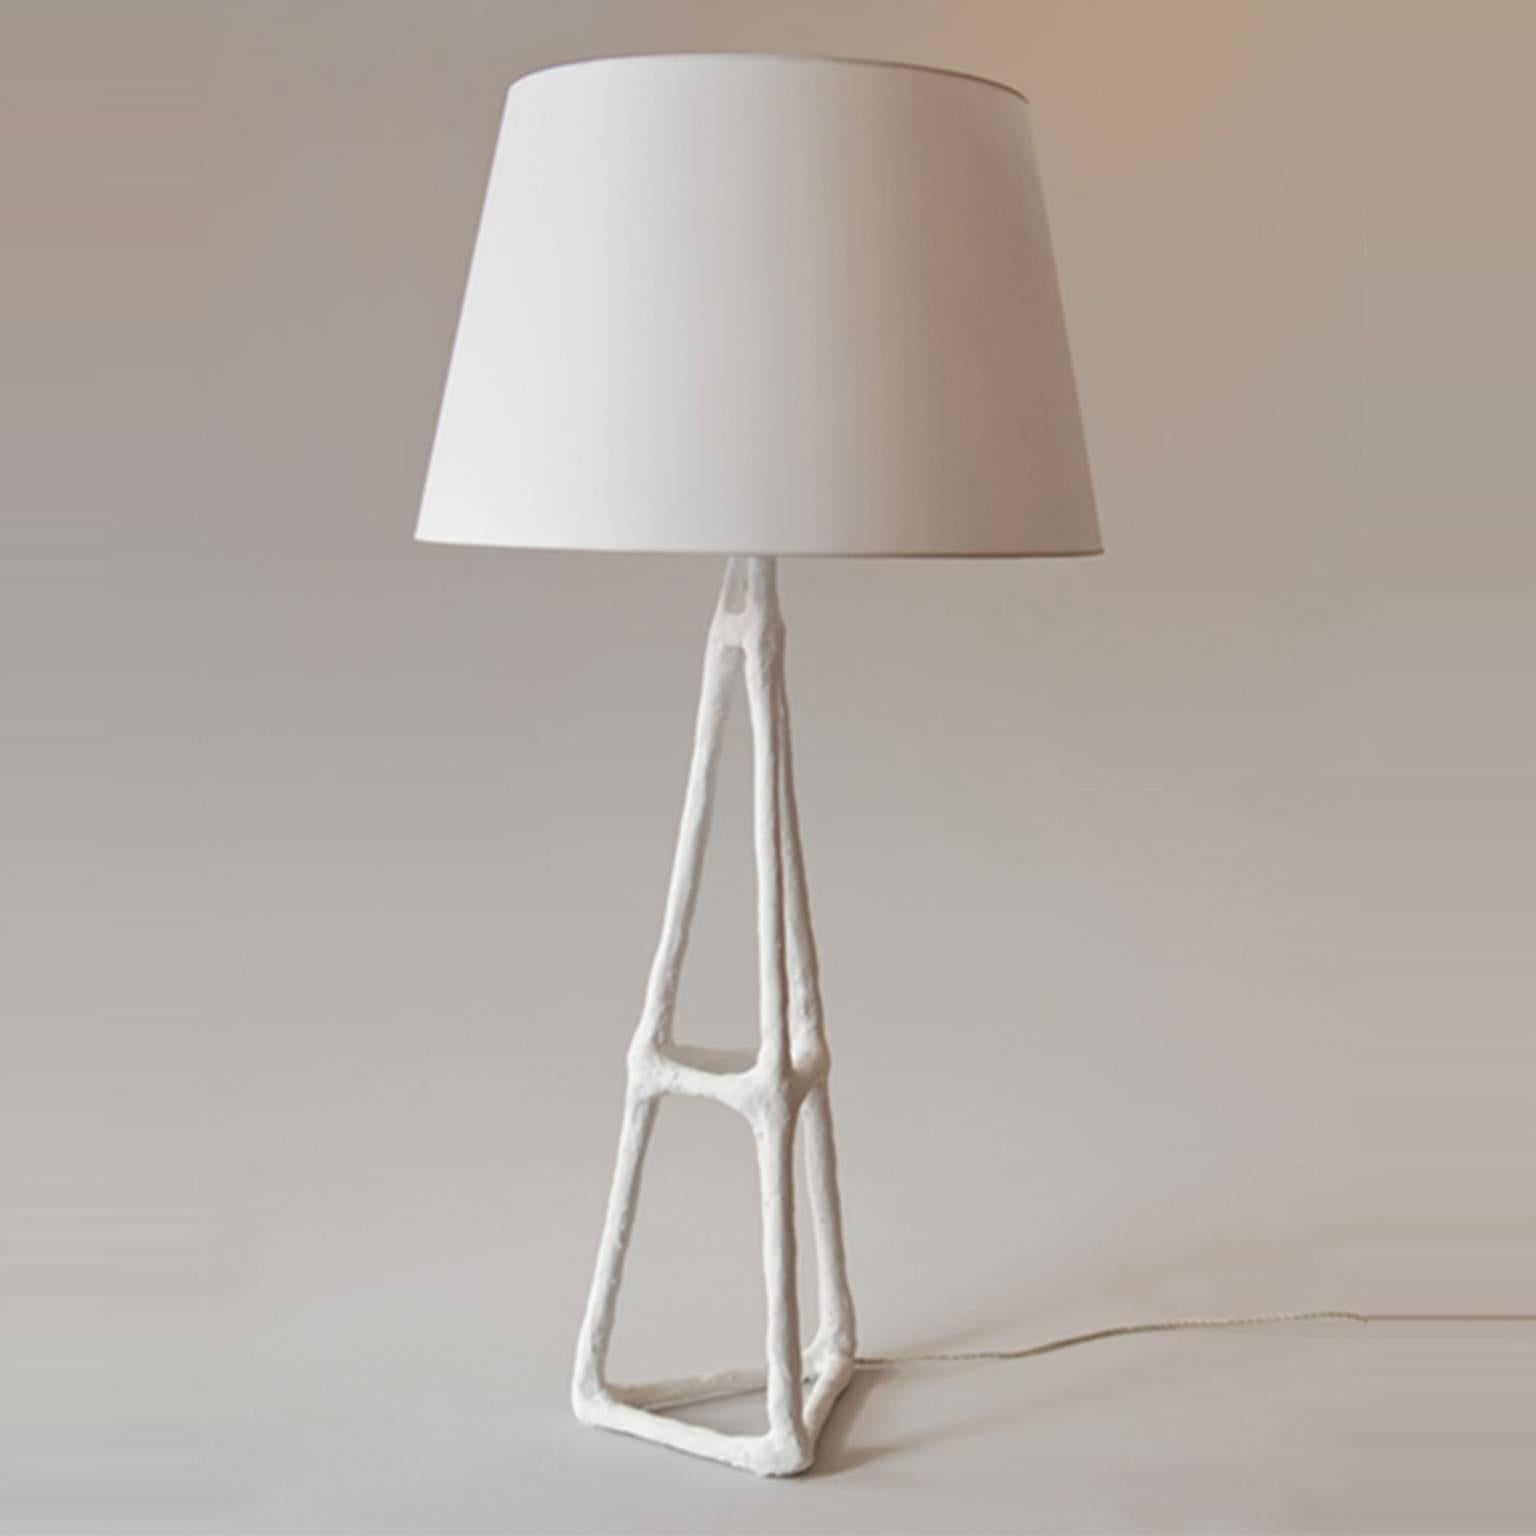 Artifex handmade plaster solid firm coated finish table lamp.
Shade included by trans-LUXE.
Shade size: 15" D top x 20" D bottom x 12 1/2" H.
Handmade plaster solid firm coated finish.
Measures: 35” H X 12” W *Base shown with